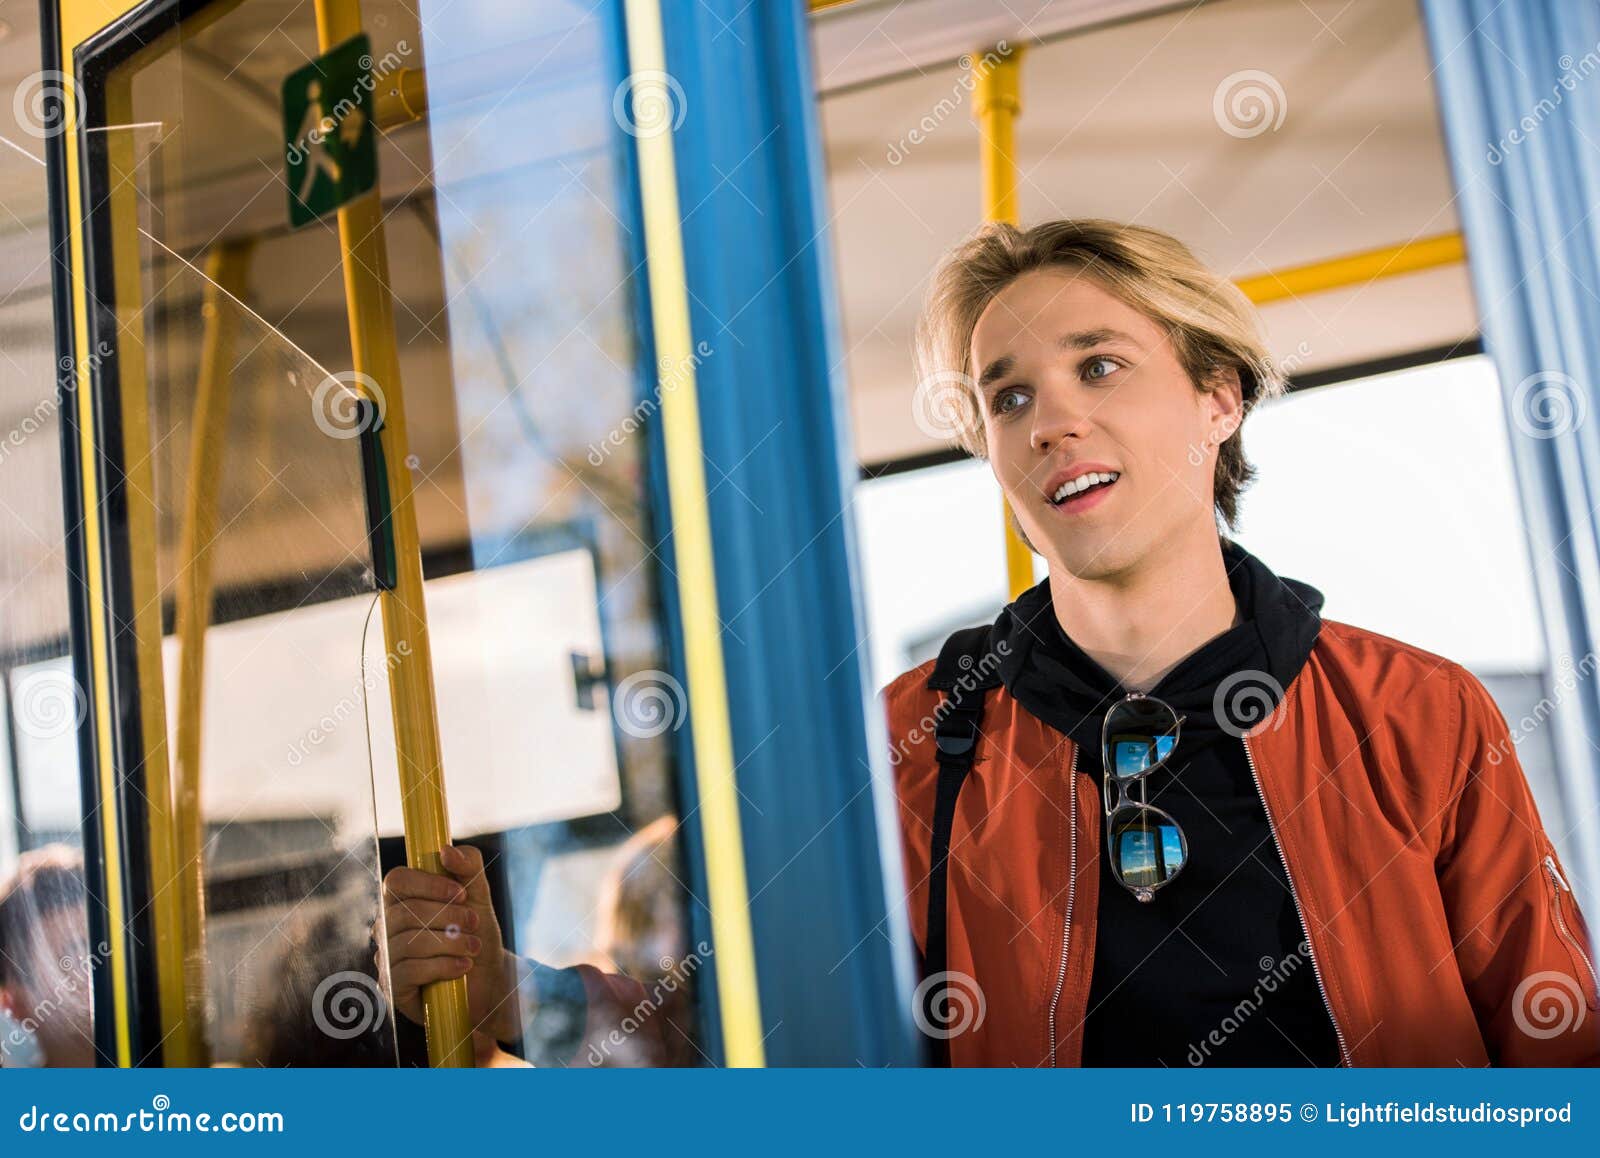 A Man is Sitting on the Bus Near a Glass Window with Steam Stock